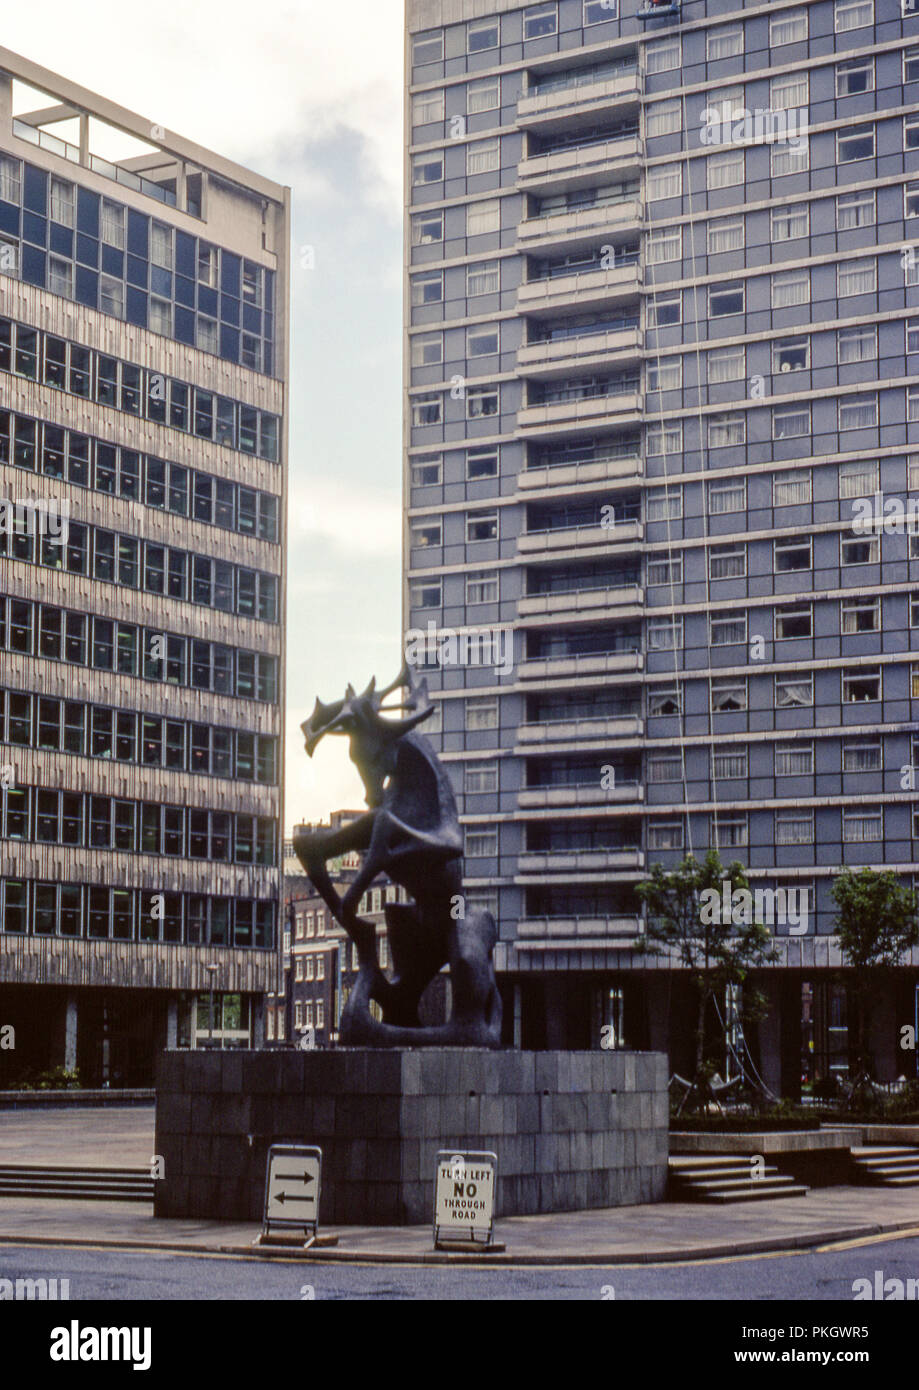 Stag Place Photographed in November 1972, now Redeveloped into Cardinal Place, Victoria Street, London, SW1E. Original Photo taken in November 1972 on 35mm slide film. Stock Photo